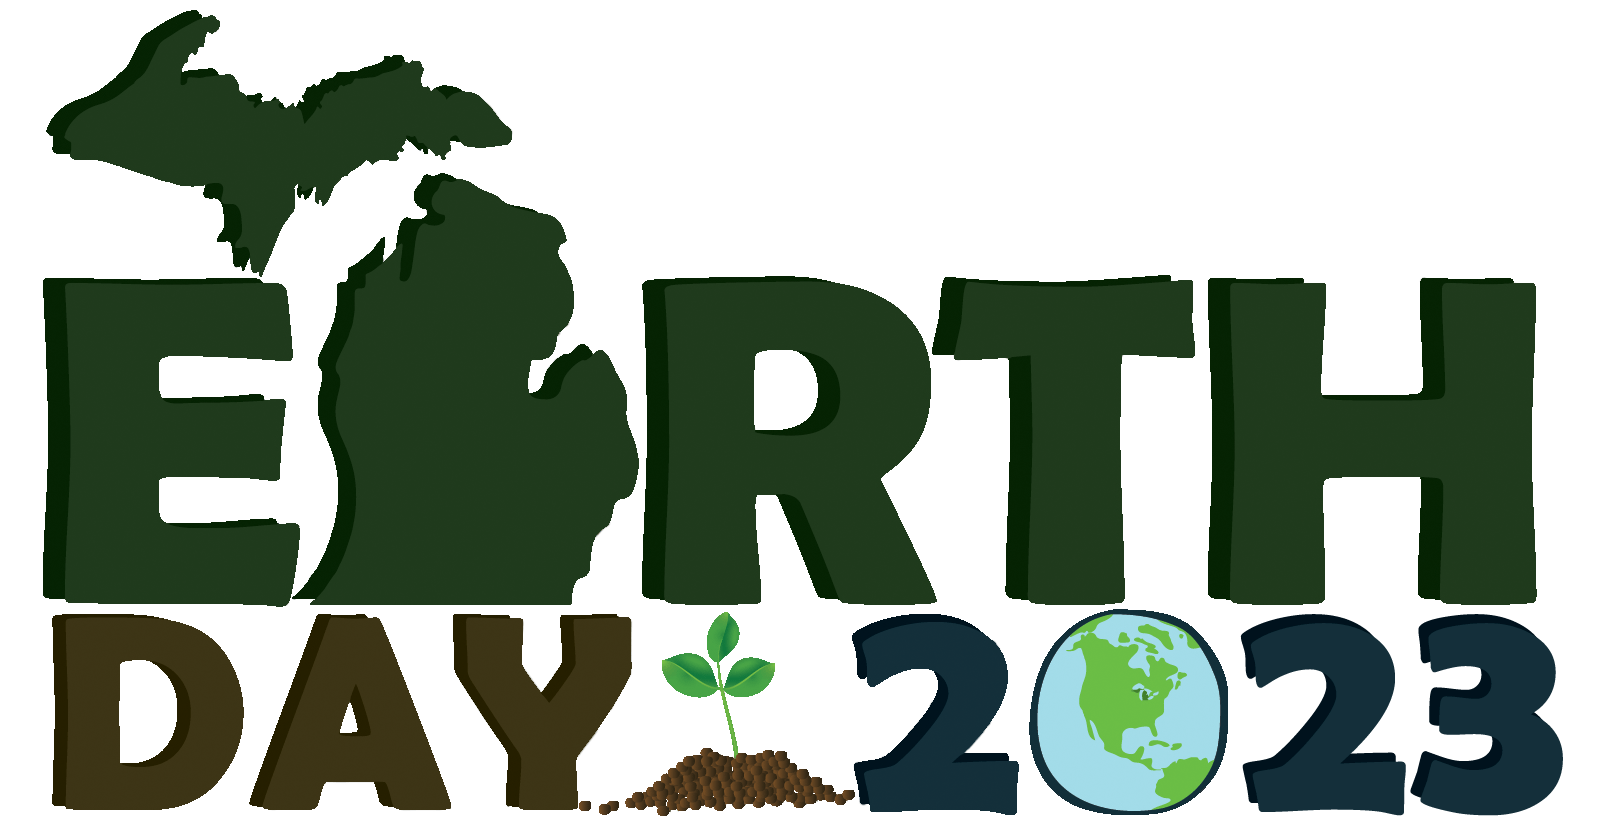 INVESTING IN OUR PLANET: INSIGHTS FROM EARTHDAY.ORG’S EARTH WEEK 2023